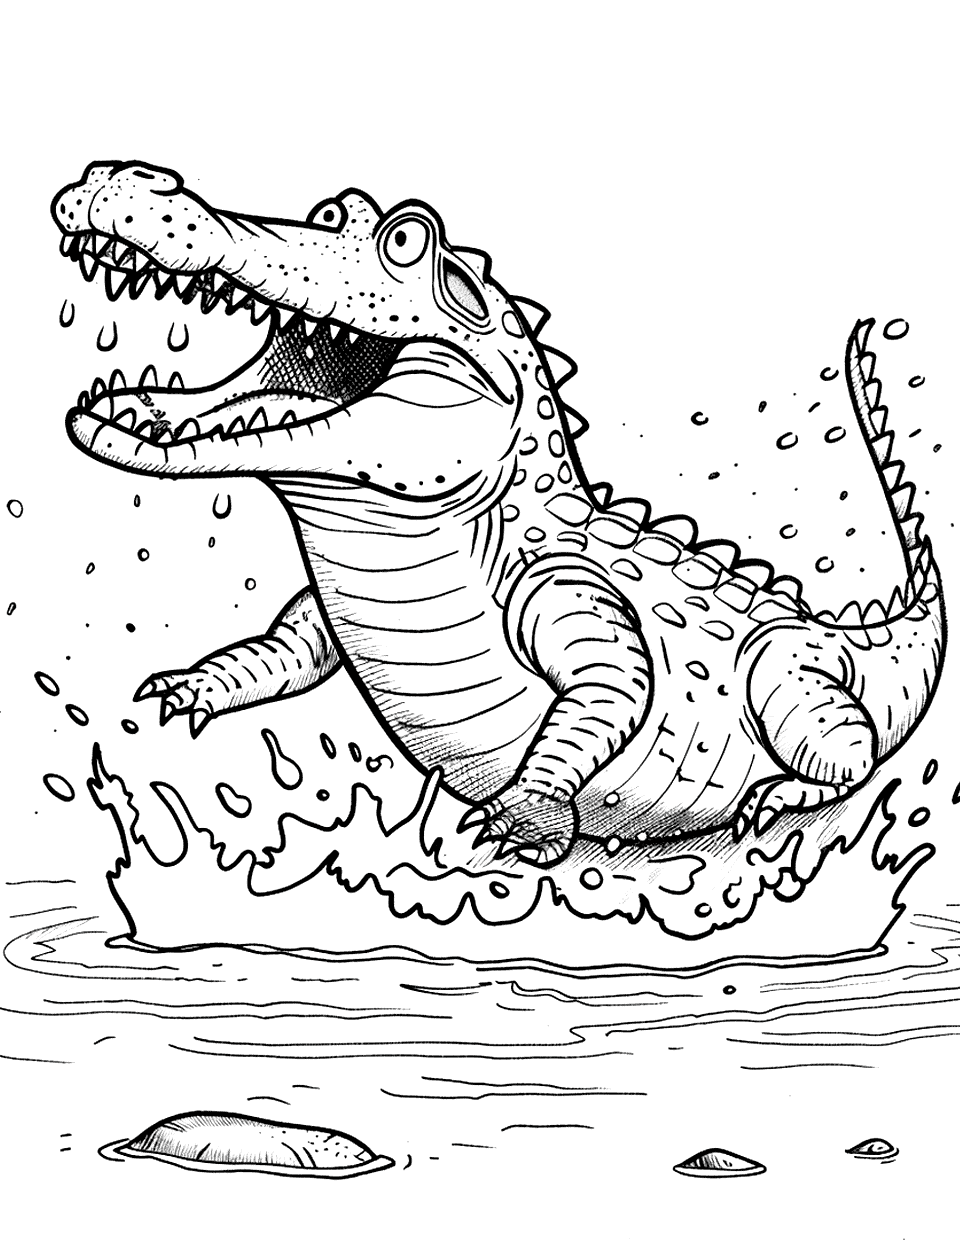 Playful Crocodile in Mud Coloring Page - A crocodile rolling happily in the mud with splatters around it.